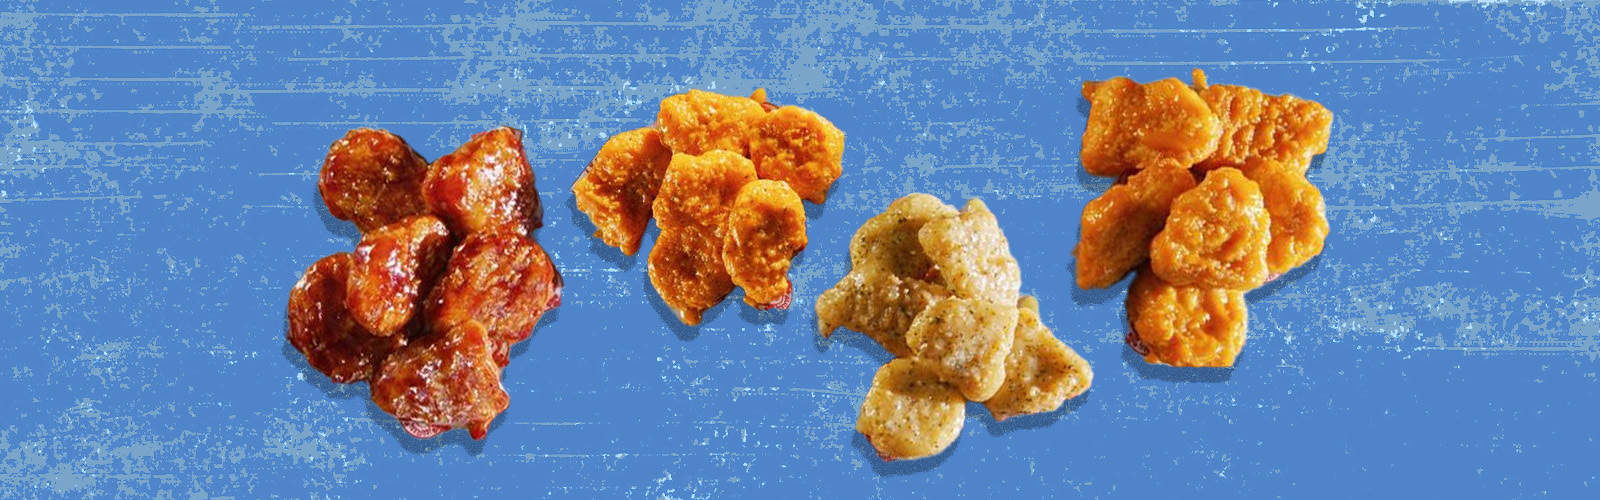 Wendy's Sauced Nuggets(1600x500)